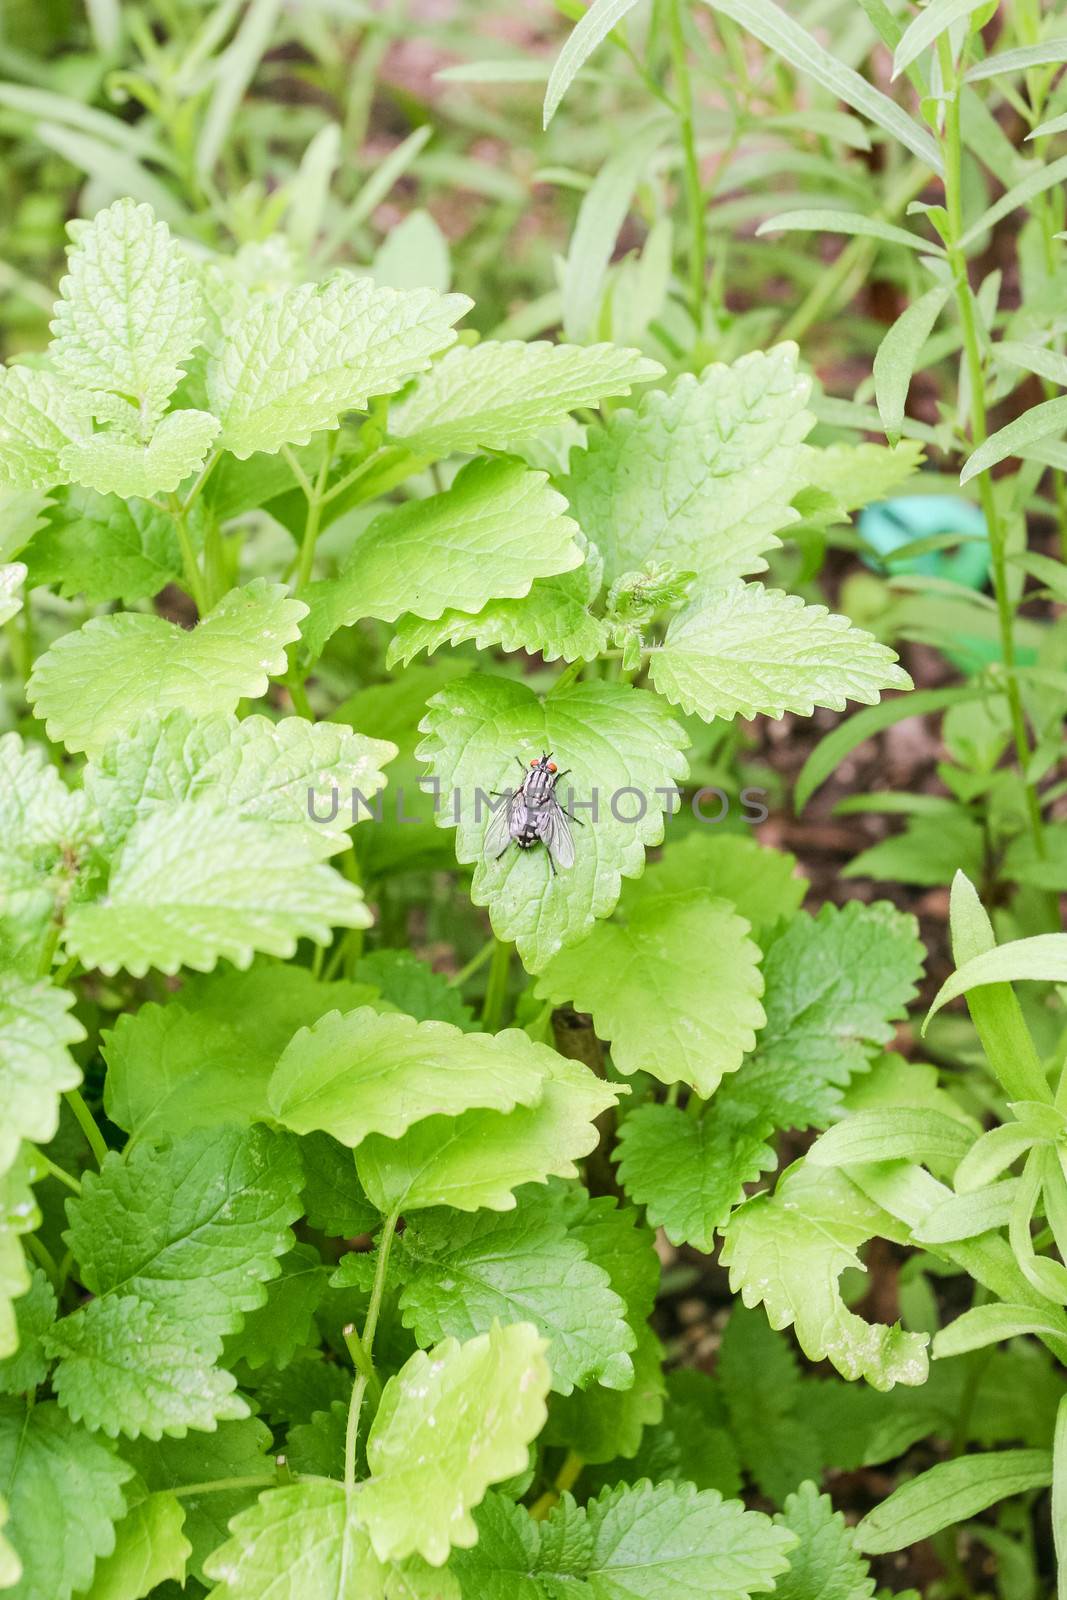 Lemon balm (Melissa officinalis) is a perennial herb in the mint family Lamiaceae, native to center-southern Europe and the Mediterranean region.